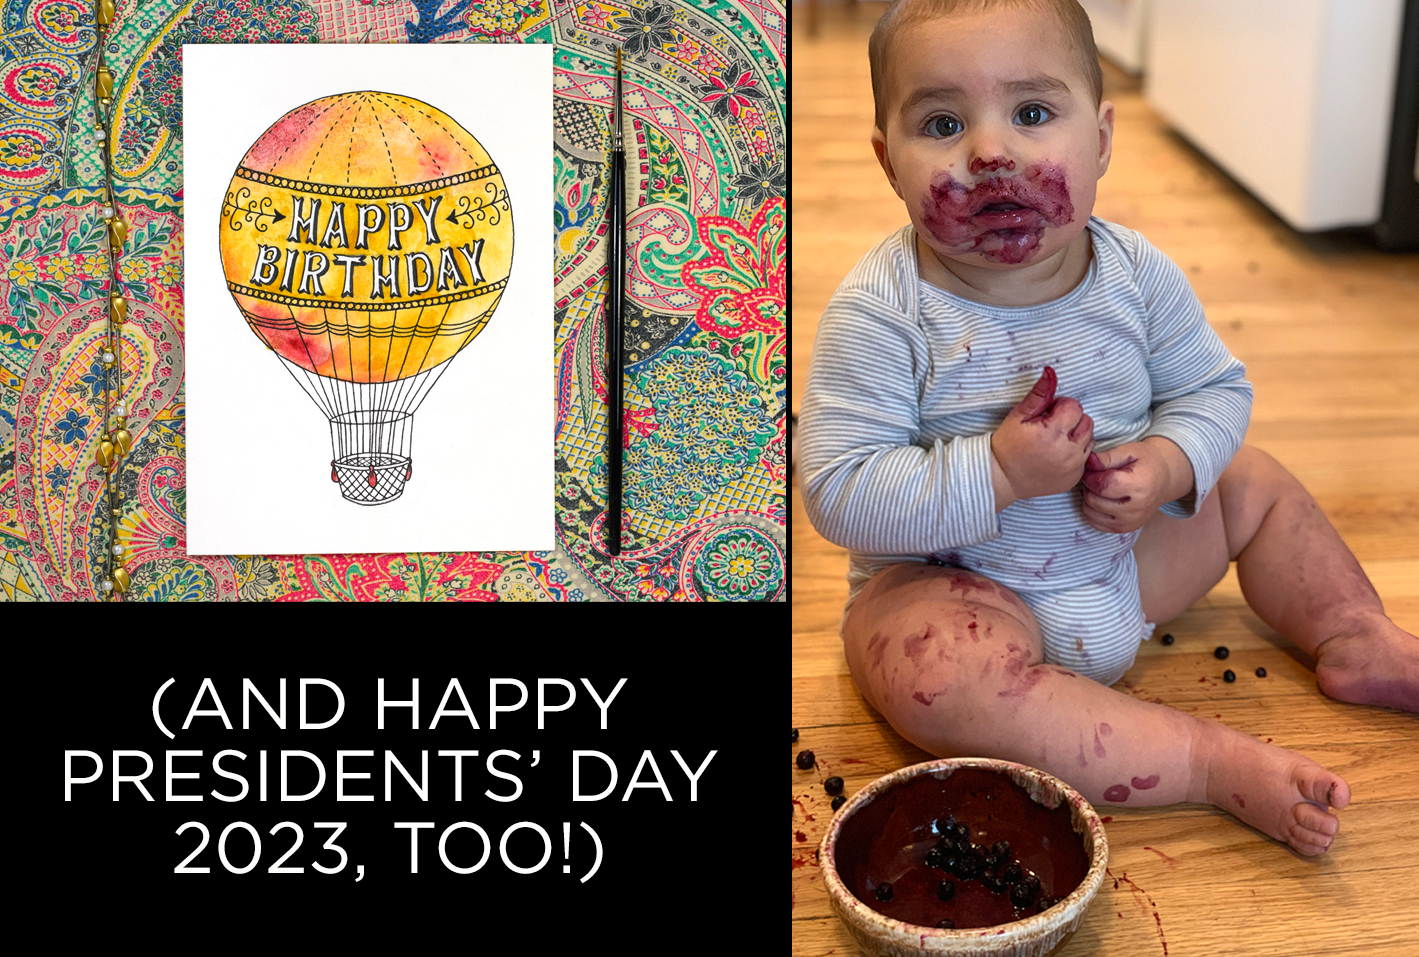 Happy Birthday to Pia, and Happy Presidents' Day!